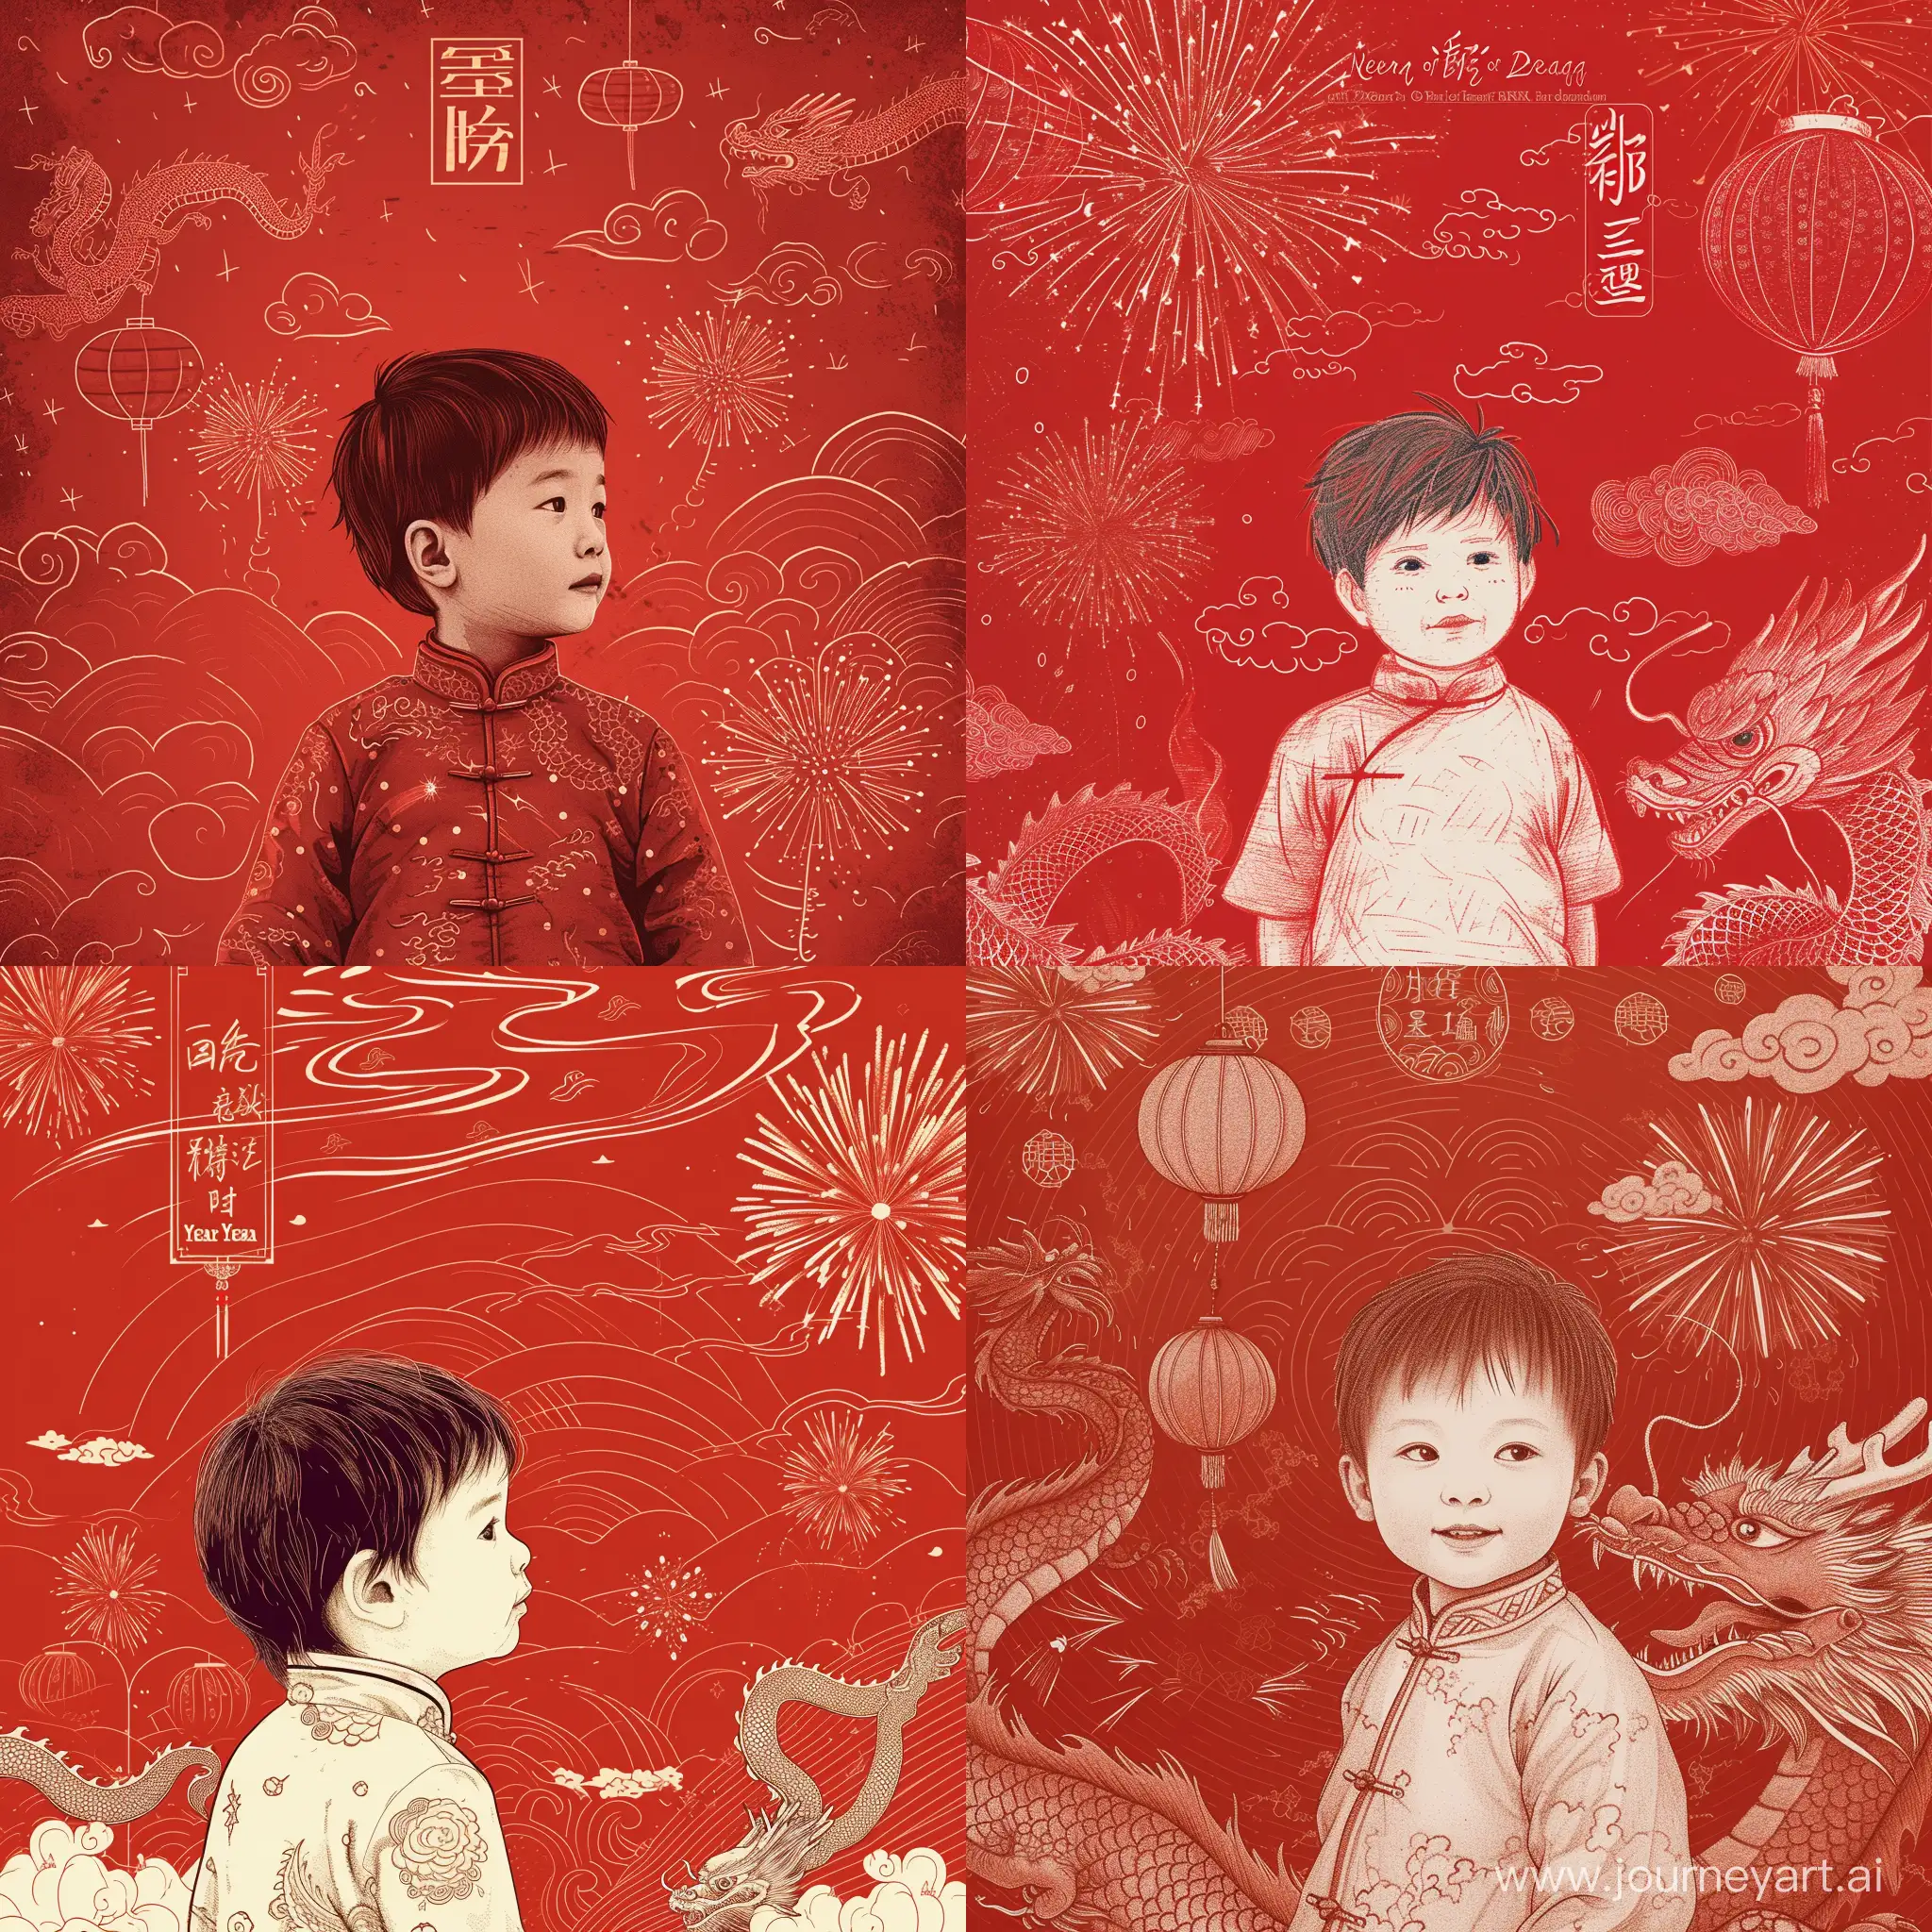 Chinese little boy, blushing, full-body shot, facing forward
Red background,
Lines, flying dragon and auspicious cloud patterns,
Red lanterns, fireworks blooming,
Festive, Chinese elements,
New Year, peace and joy.
Cover engraving: Year of the Dragon 龘 龘 --v 6 --ar 1:1 --no 53718